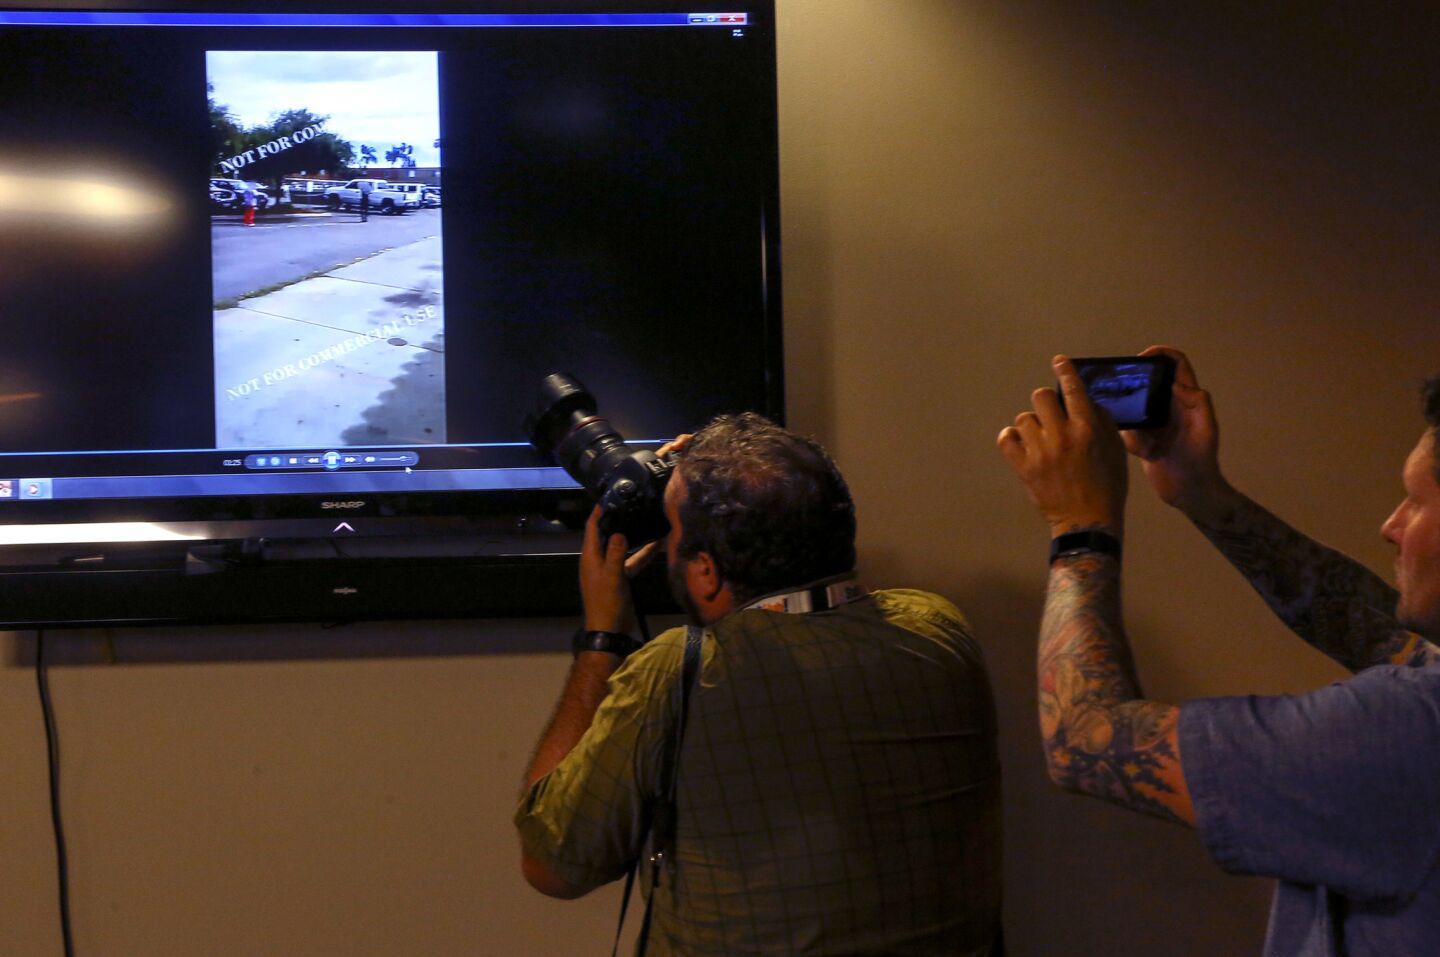 Photographers capture views of the police shooting video during a press conference at the El Cajon Police Department.